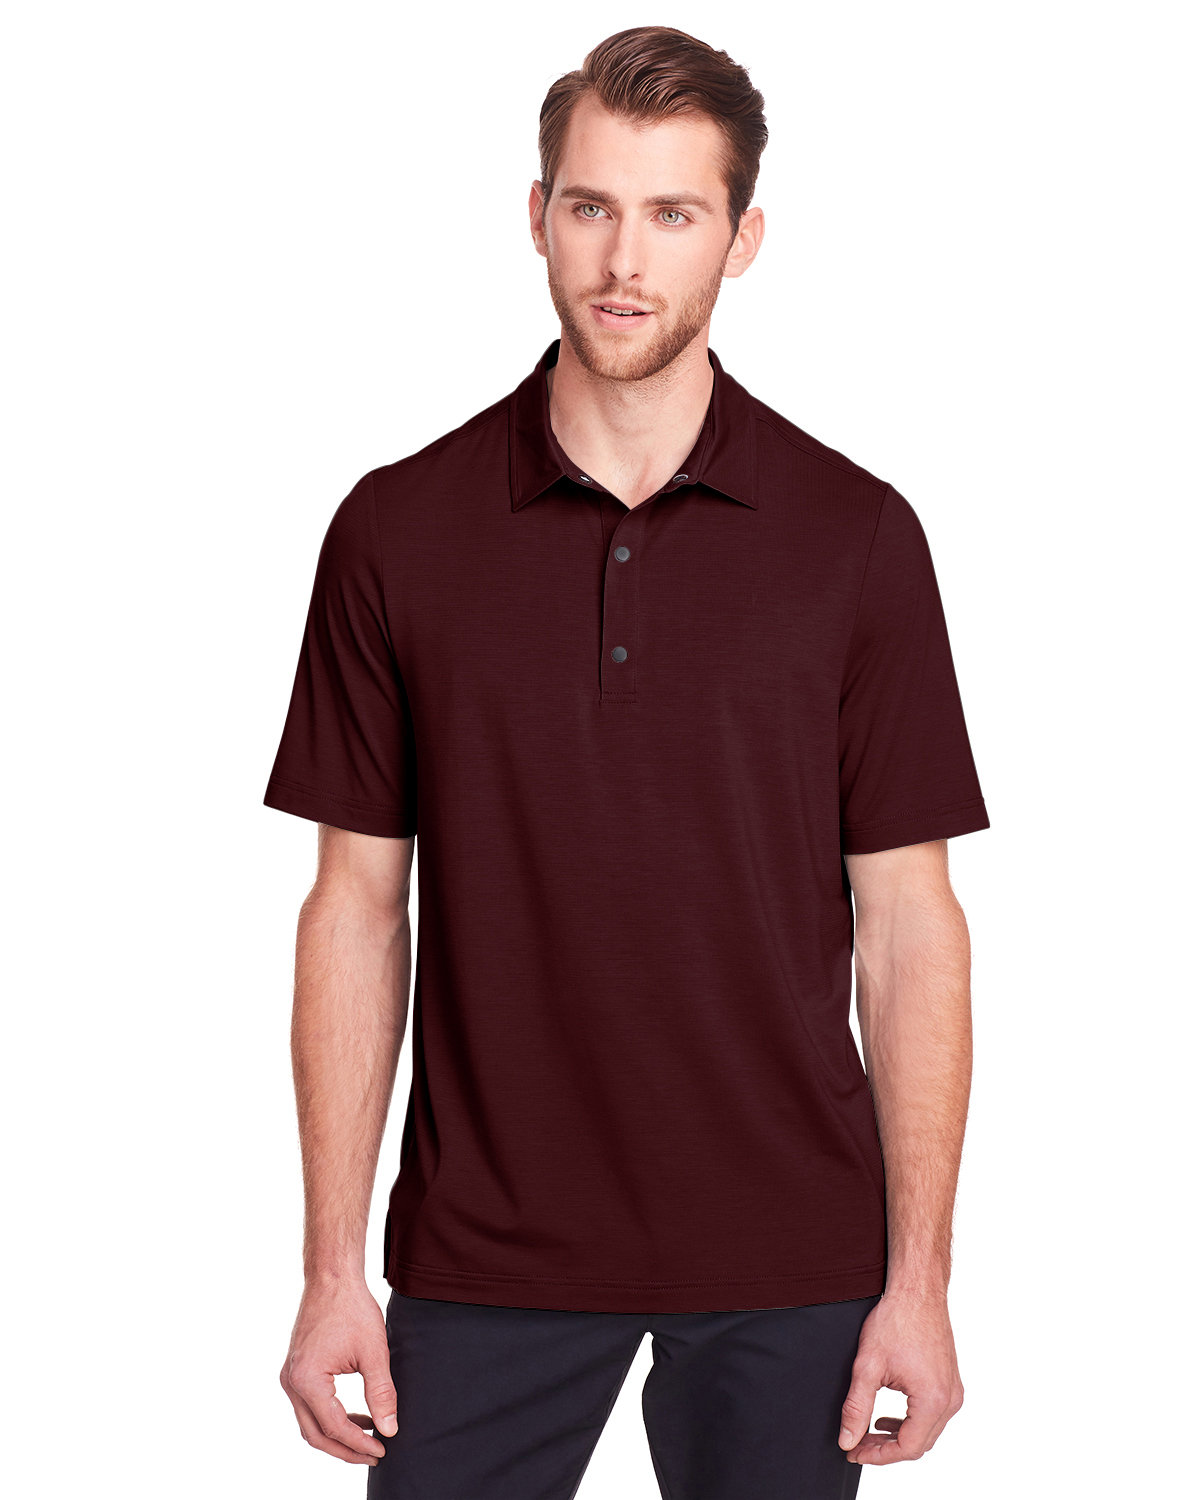 North End Men's Jaq Snap-Up Stretch Performance Polo BURGUNDY 